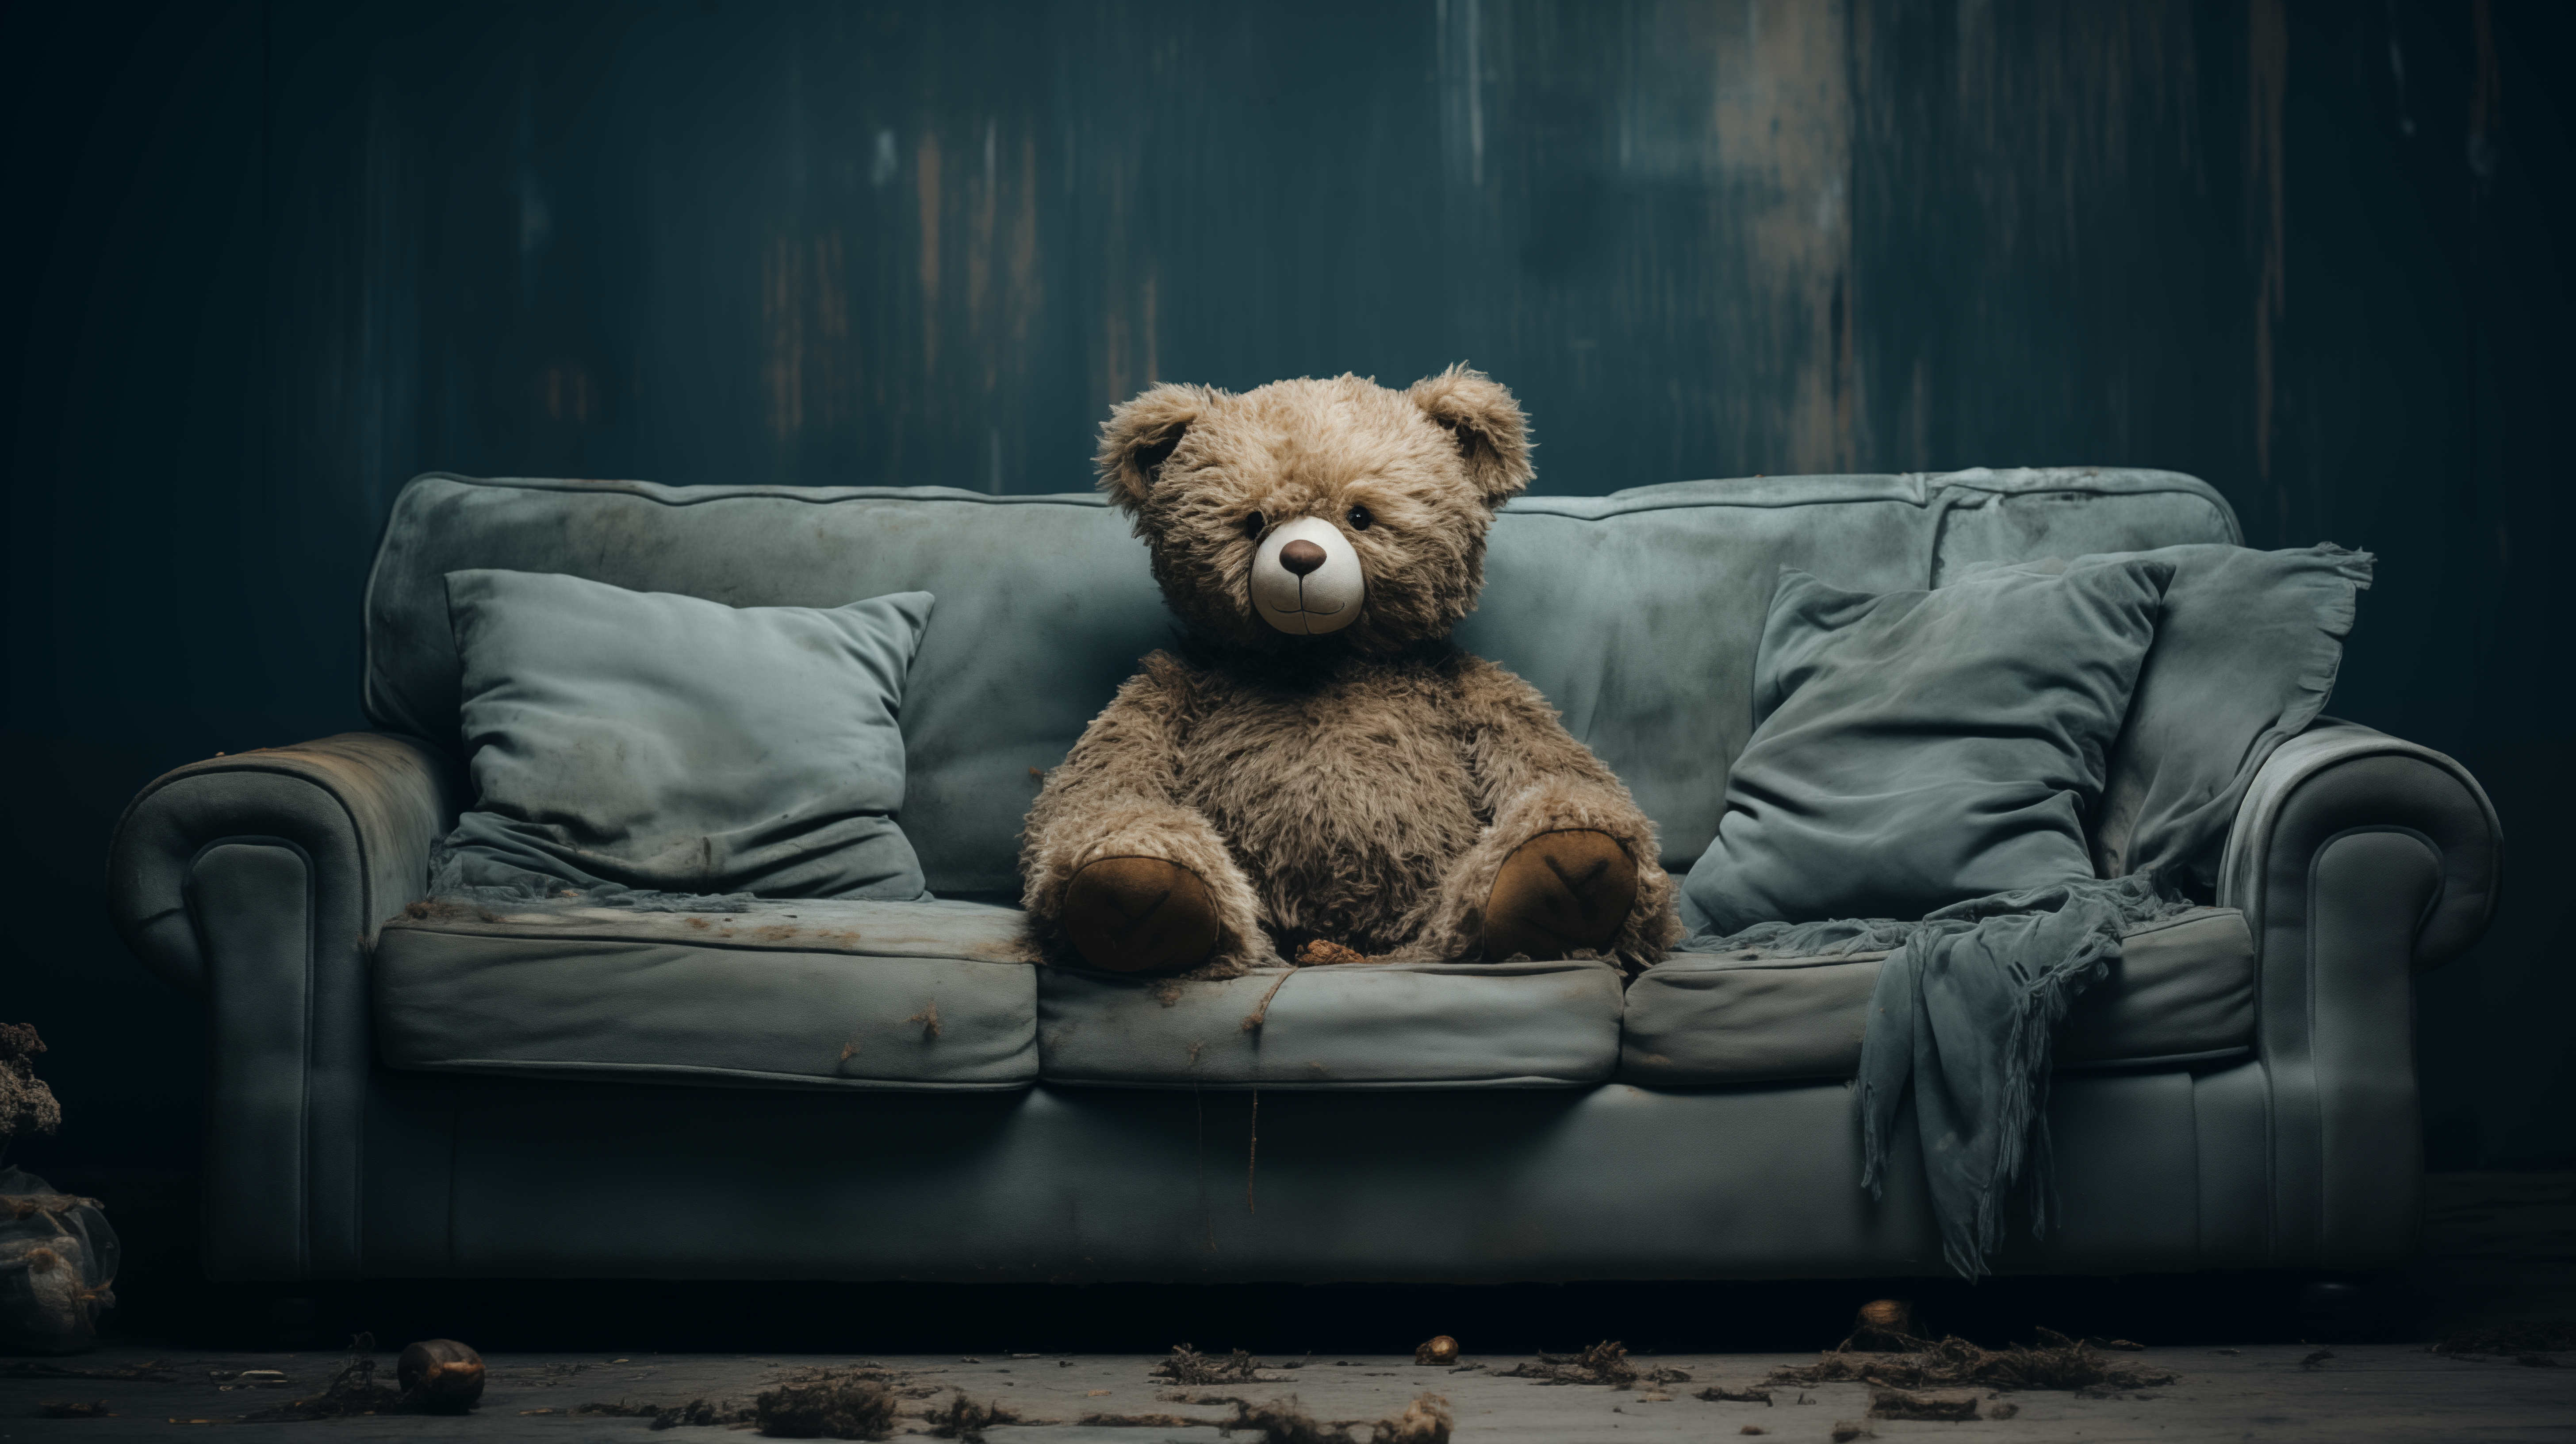 Lonely teddy bear sitting on an old couch against a dark background, HD stuffed animal desktop wallpaper and background.